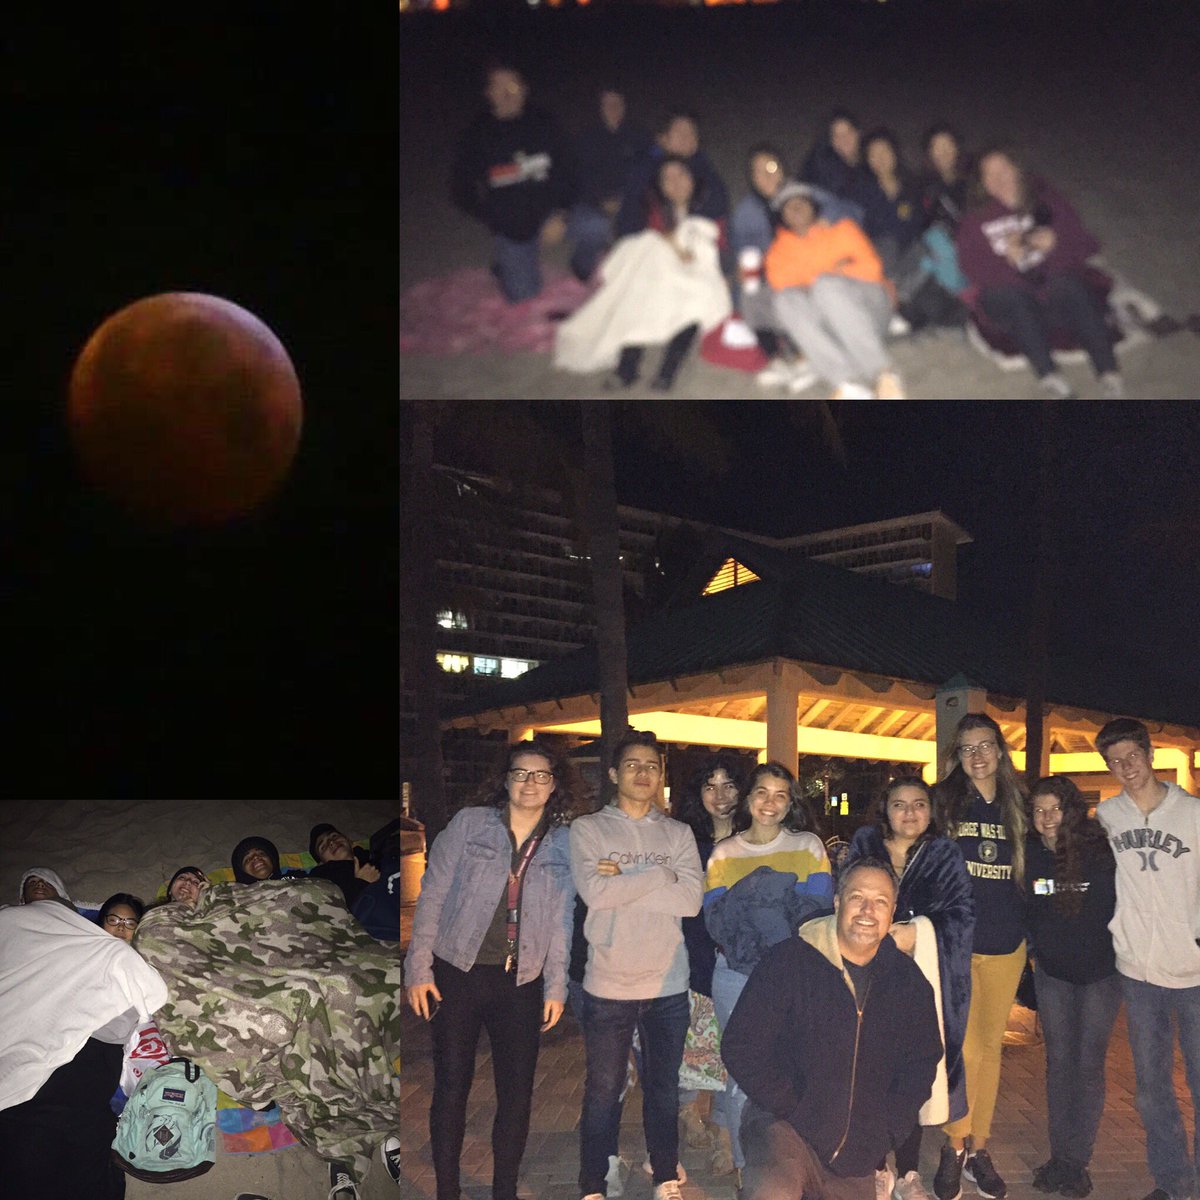 MSD Astronomy took over Deerfield Beach for the eclipse last night!  Fun times (though a bit chilly by SoFla standards, lol).  Eclipse photo by all-star Senior Varvara Chernyaeva.  @PrincipalMSD @msdclassof2019